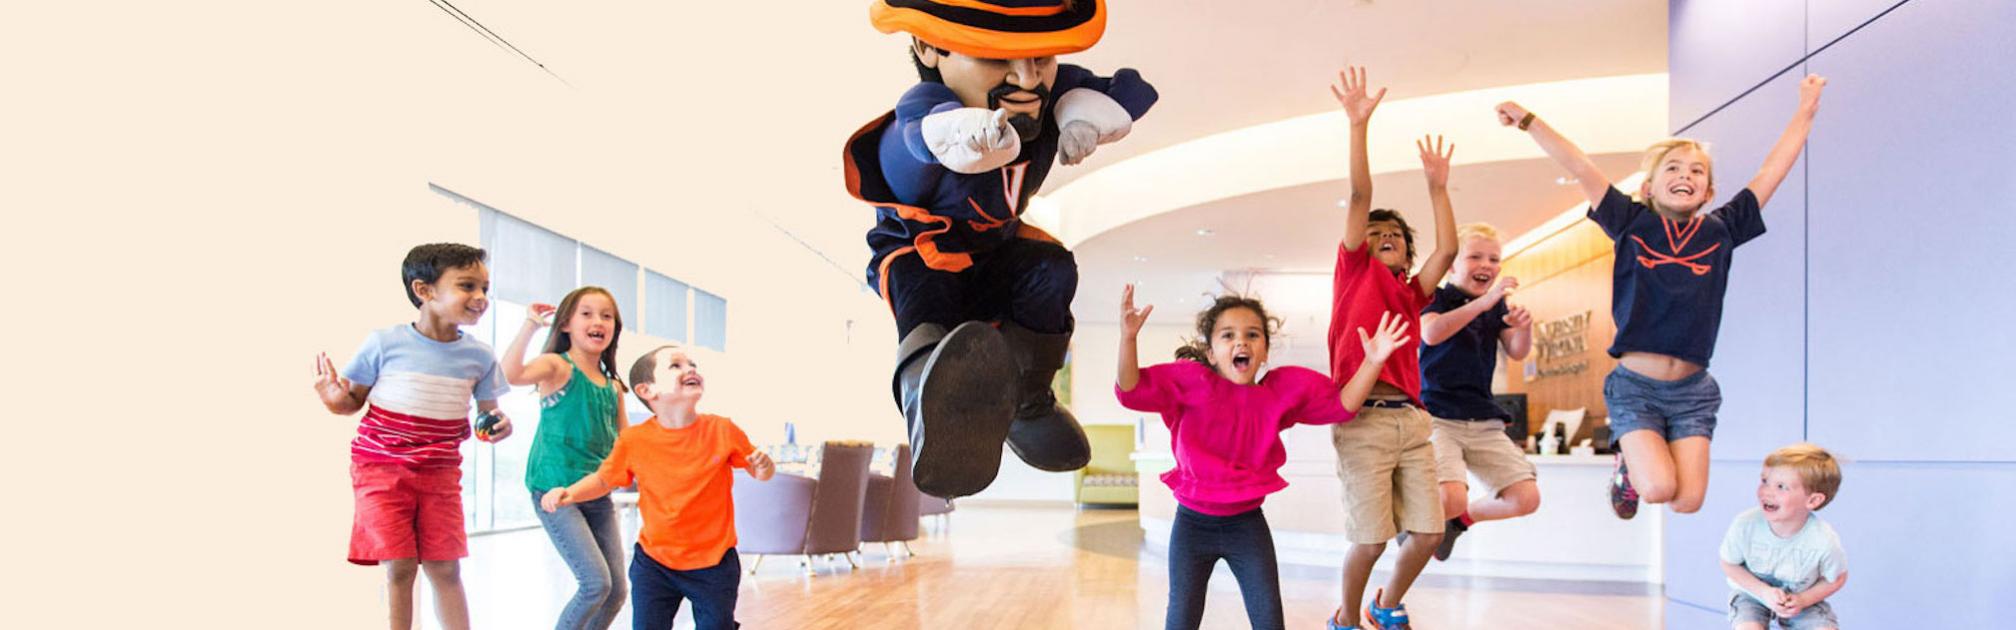 Patients at UVA Children's hospital jump in the air with UVA mascot Cav man.